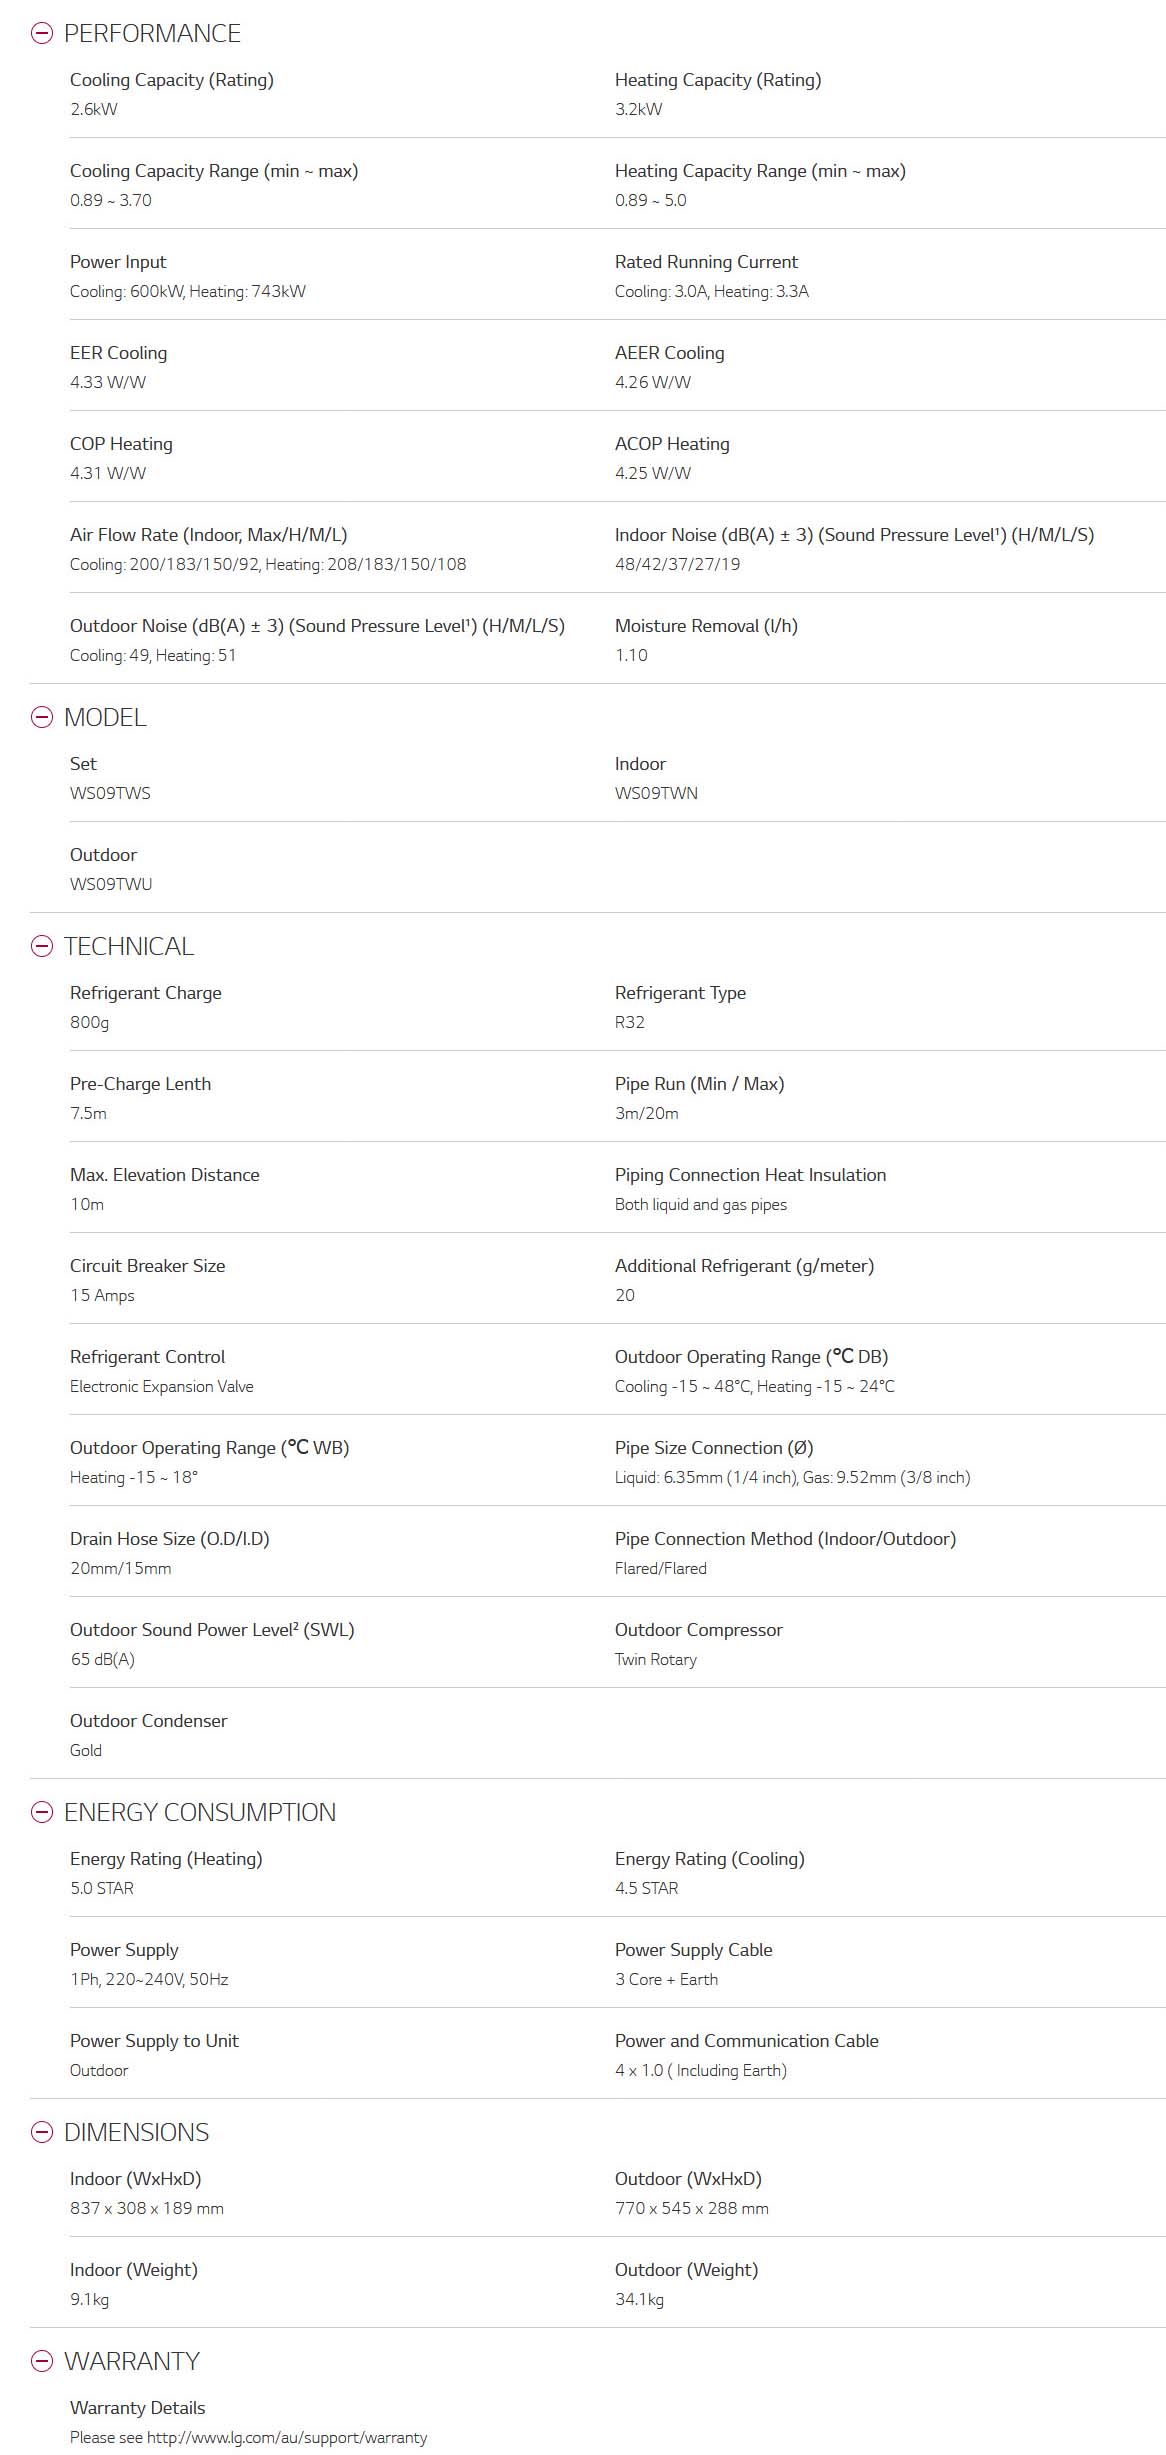 LG WS09TWS Specifications